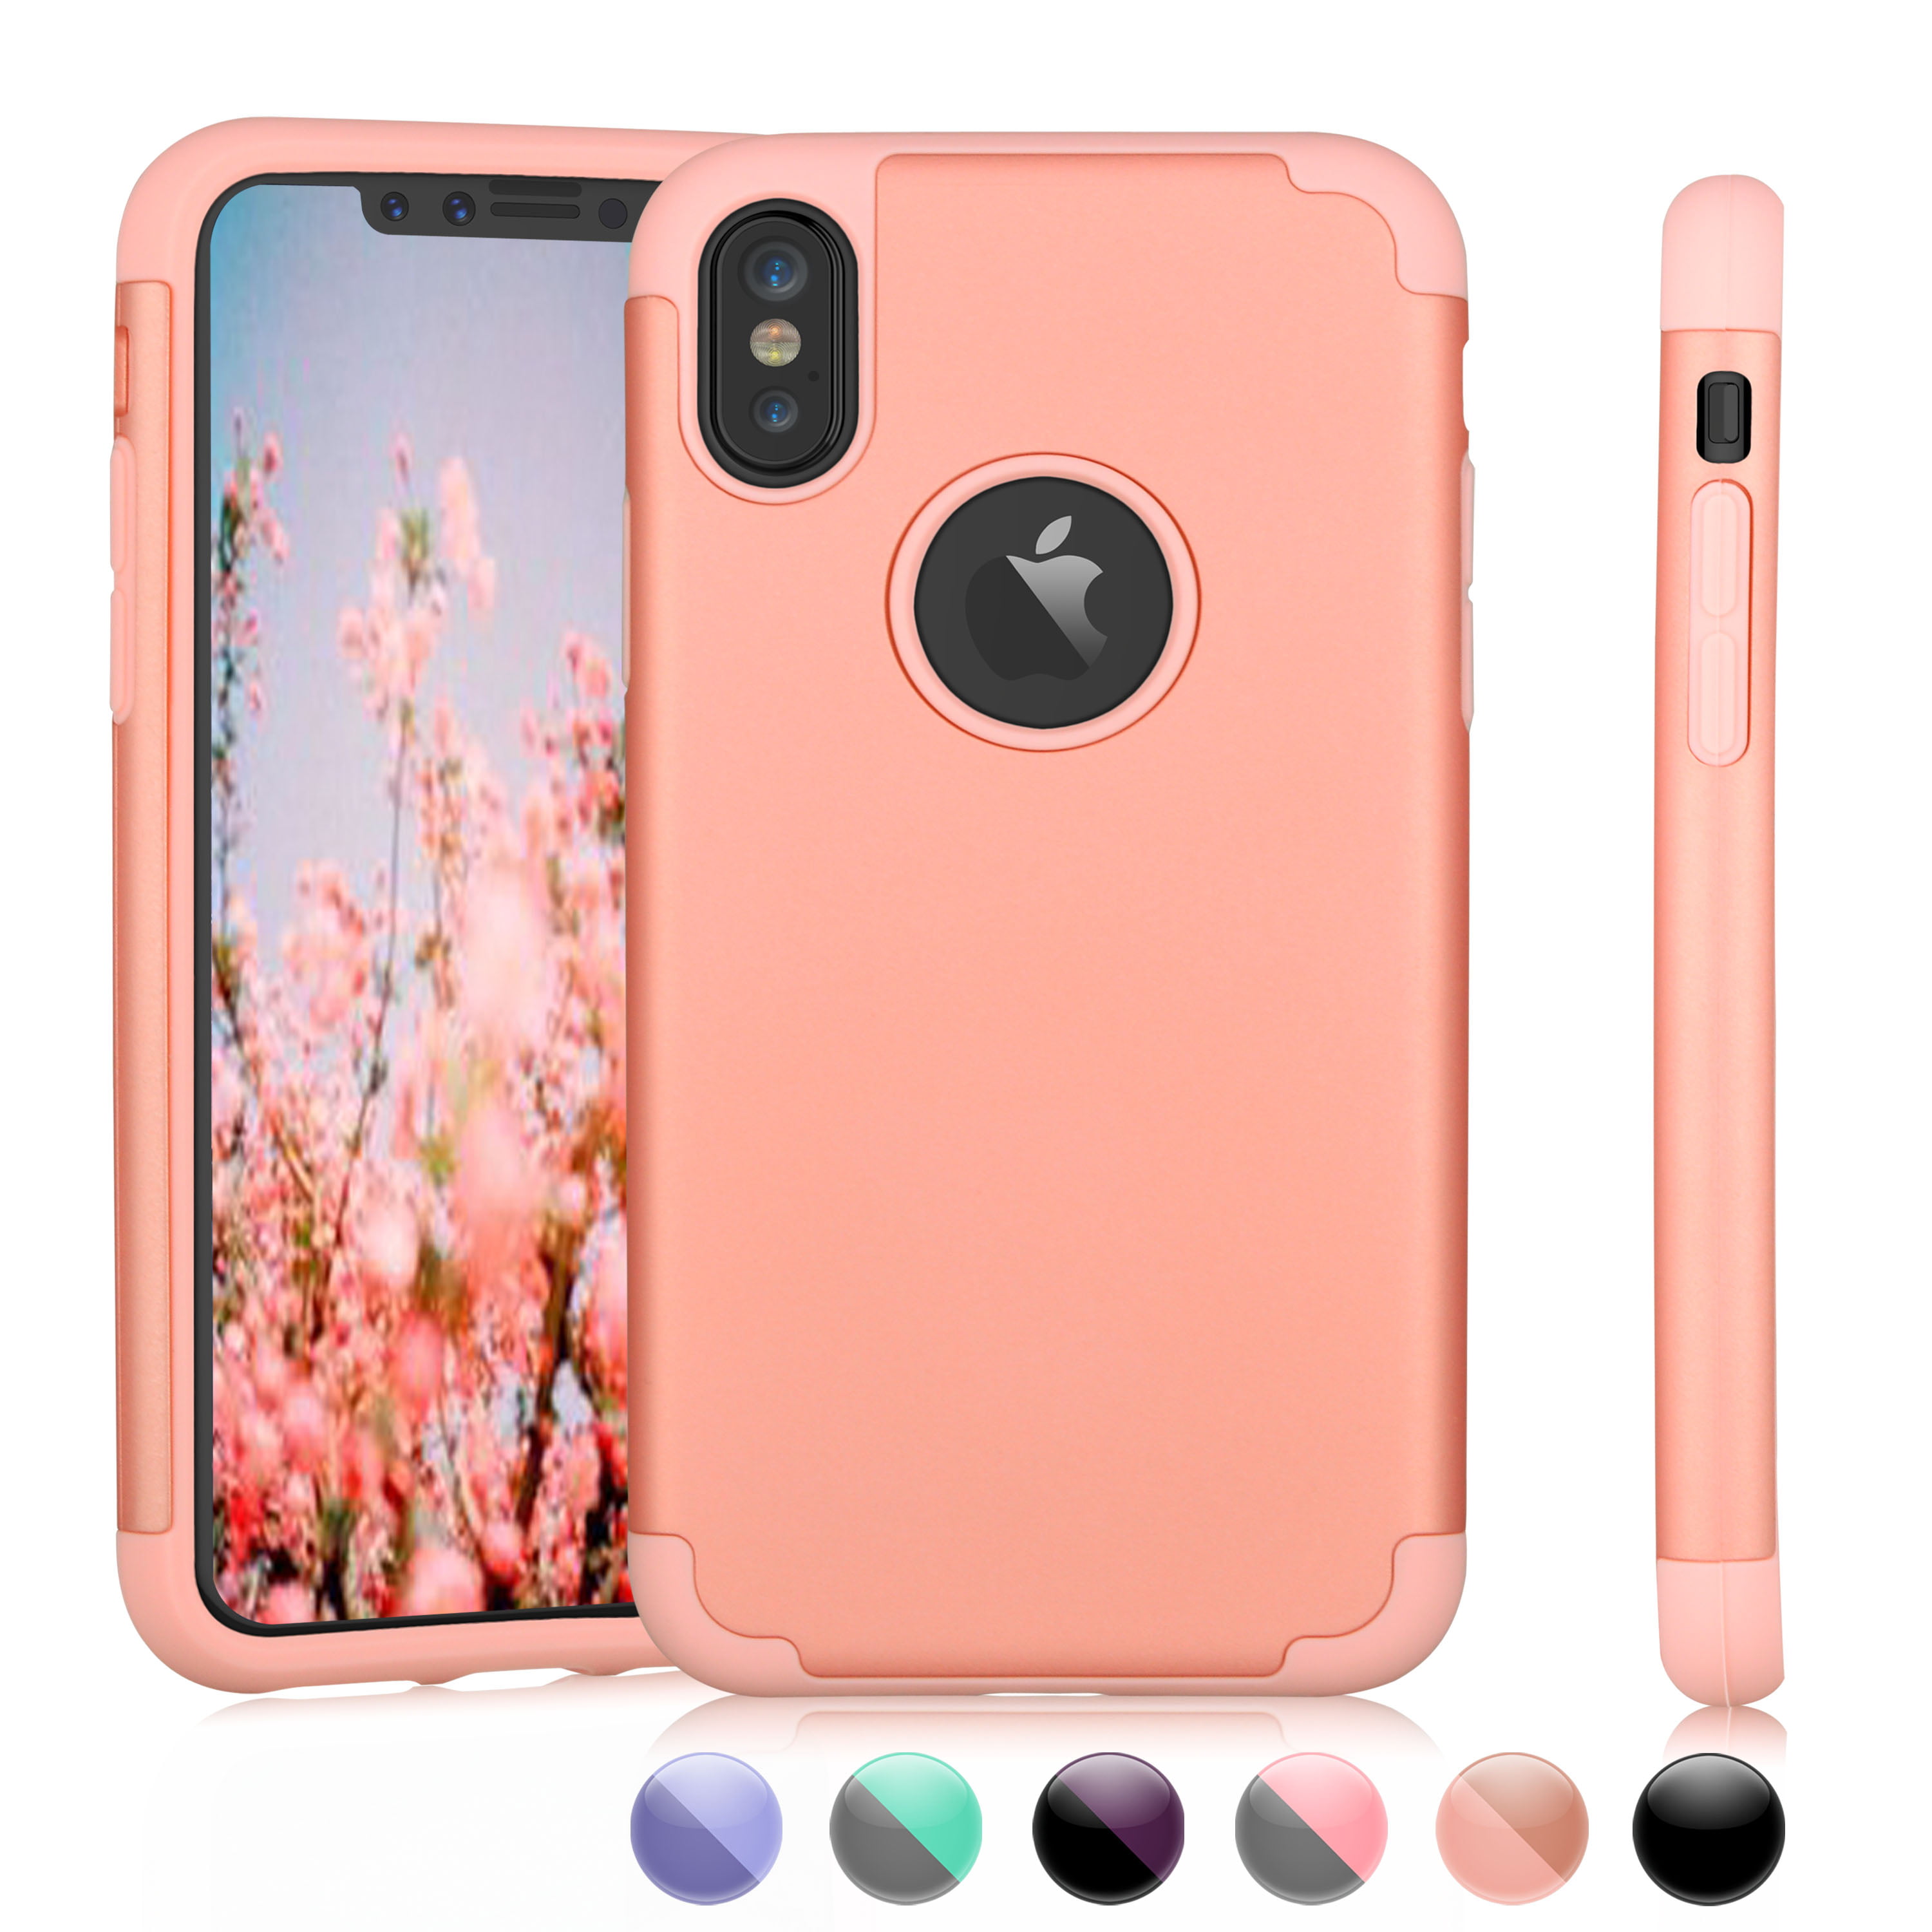 iPhone X Case,iPhone 10 Case,iPhone X Edition Case For Girls, Njjex